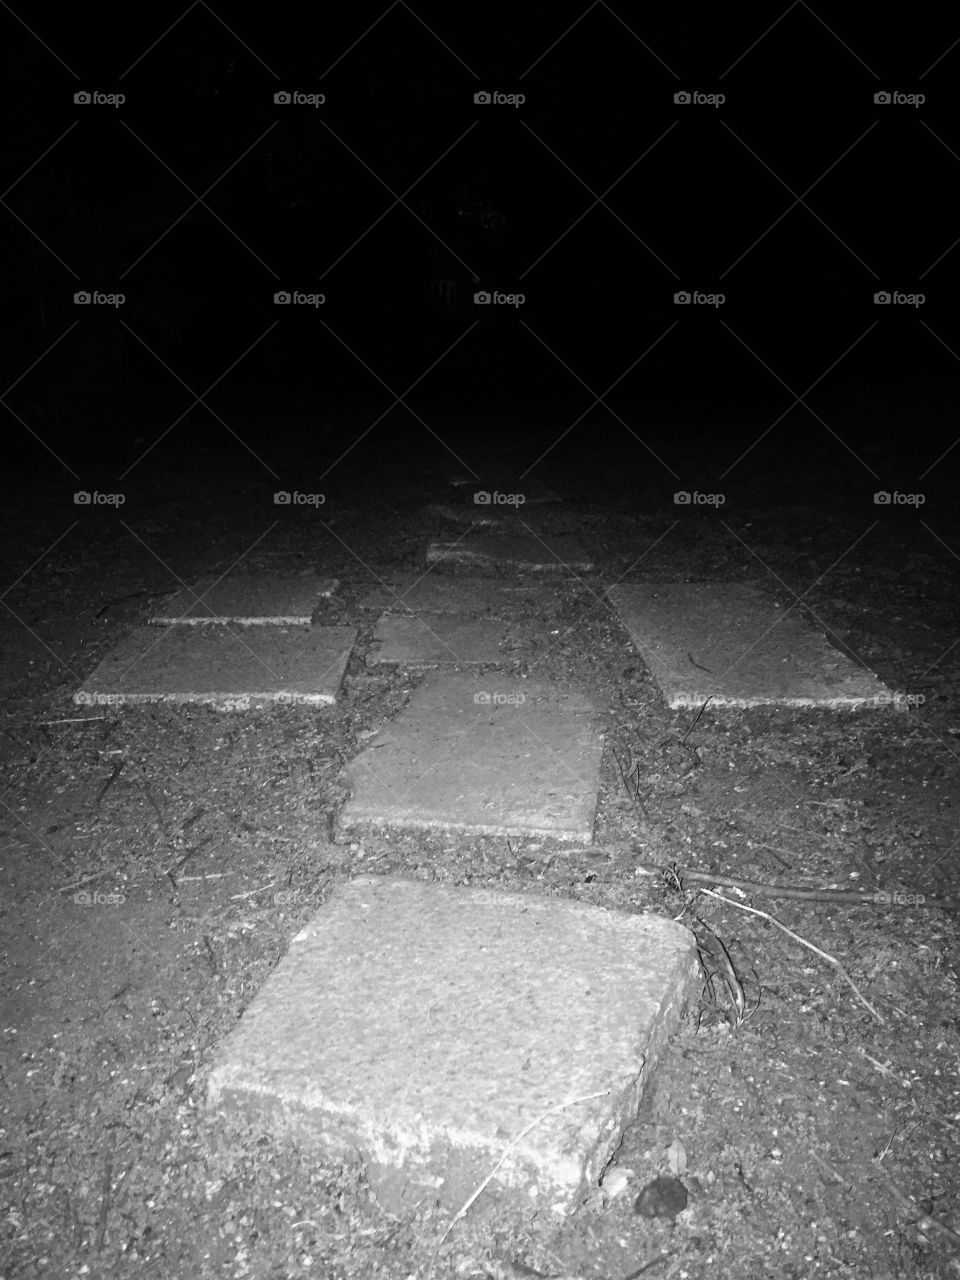 Dark muddy path late at night wish a flash to really show all the dirt and sticks laying around the slabs on the floor